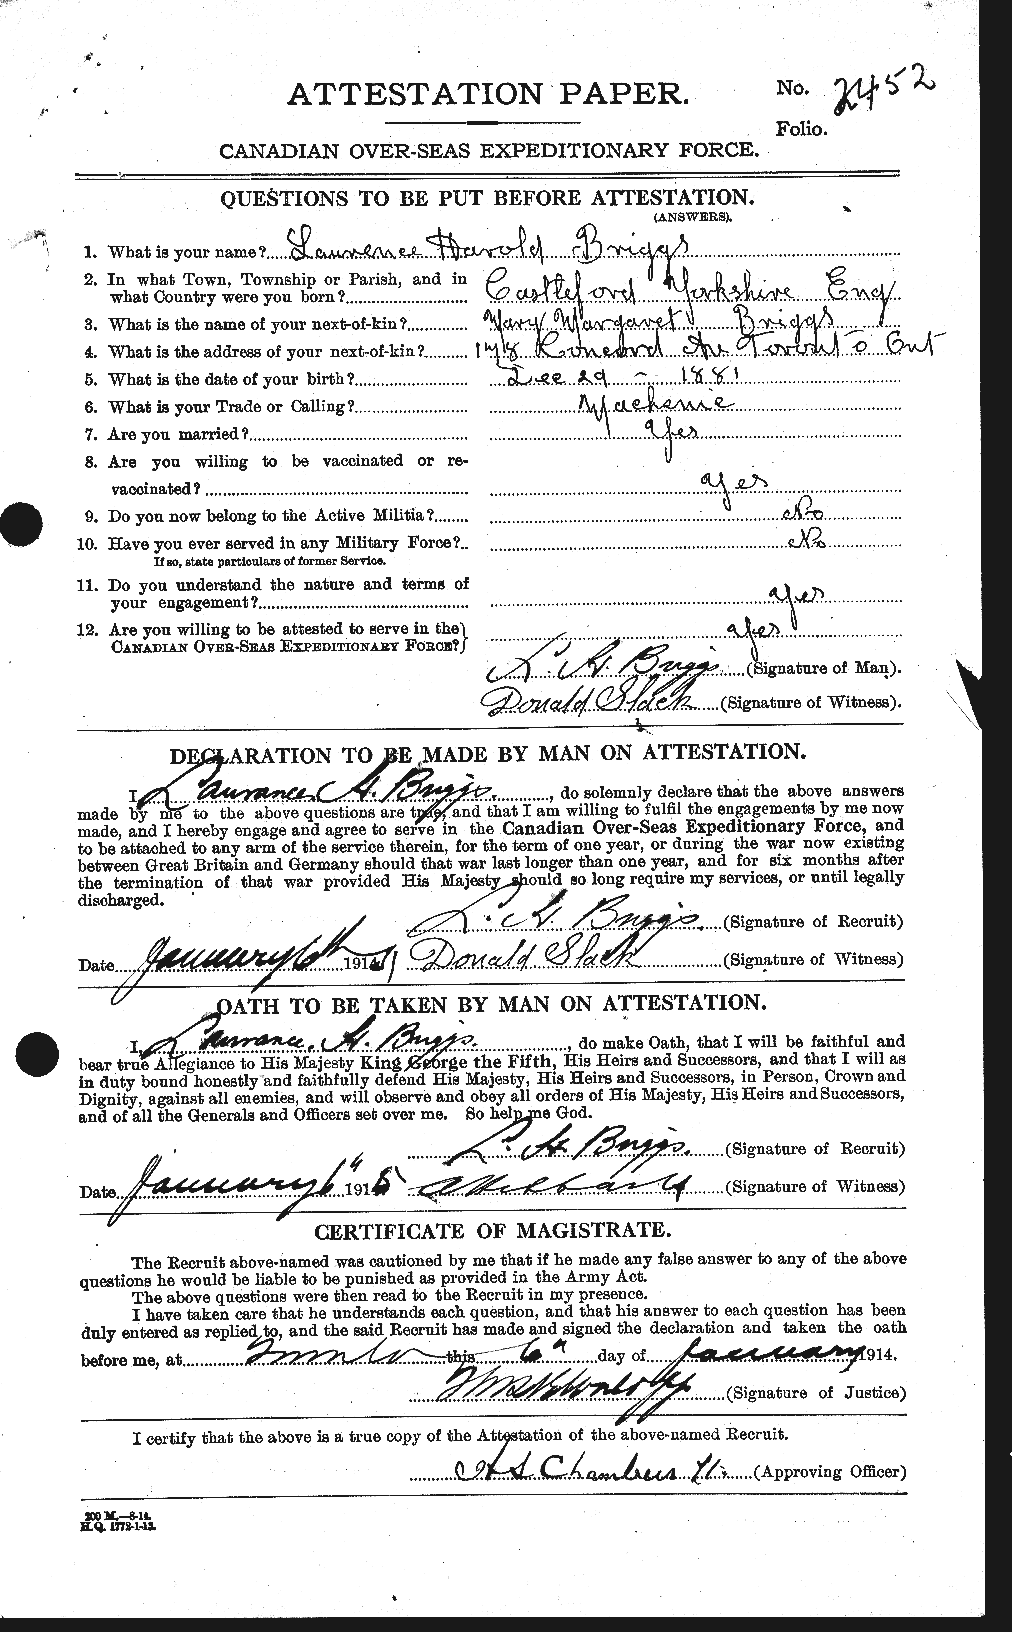 Personnel Records of the First World War - CEF 264070a